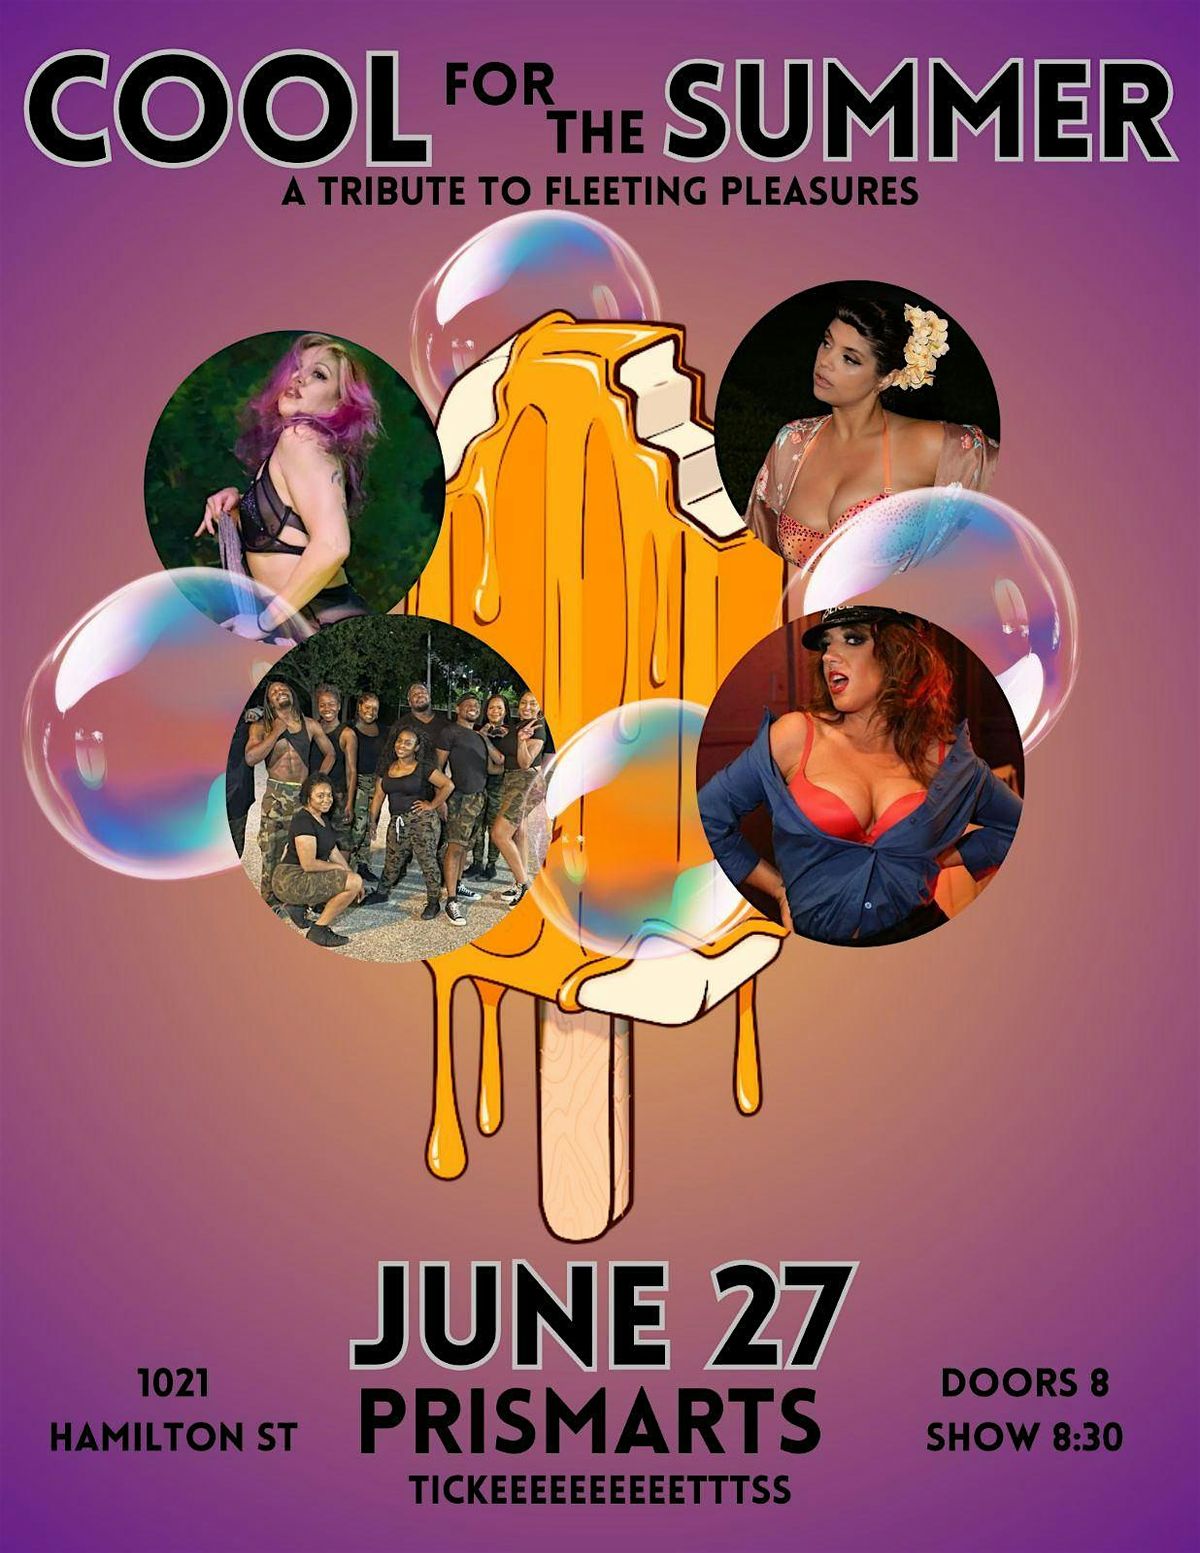 Cool for the Summer: a Burlesque & Dance Tribute to Fleeting Pleasures